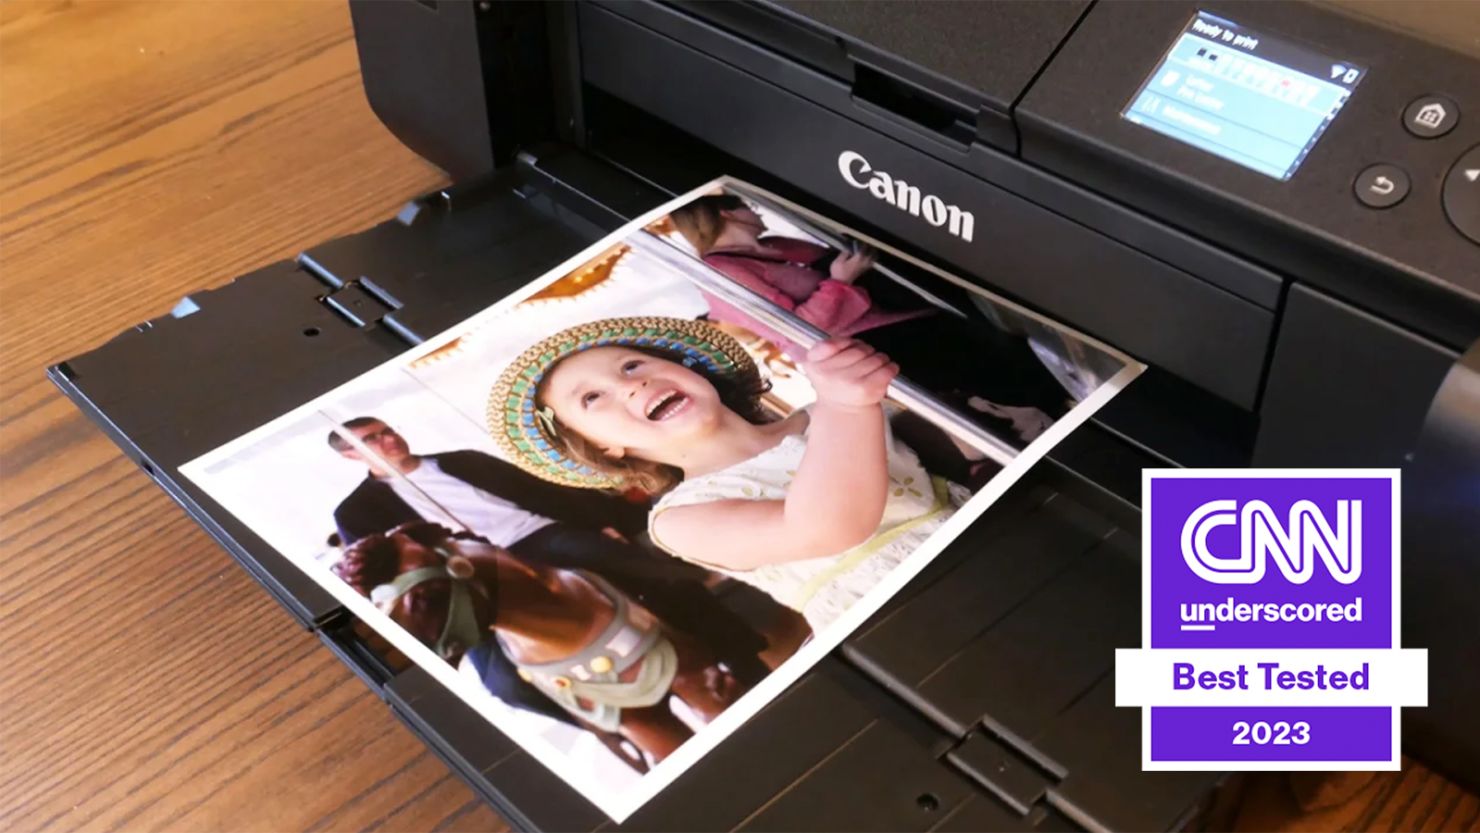 How to Print Professional-Looking Photos at Home